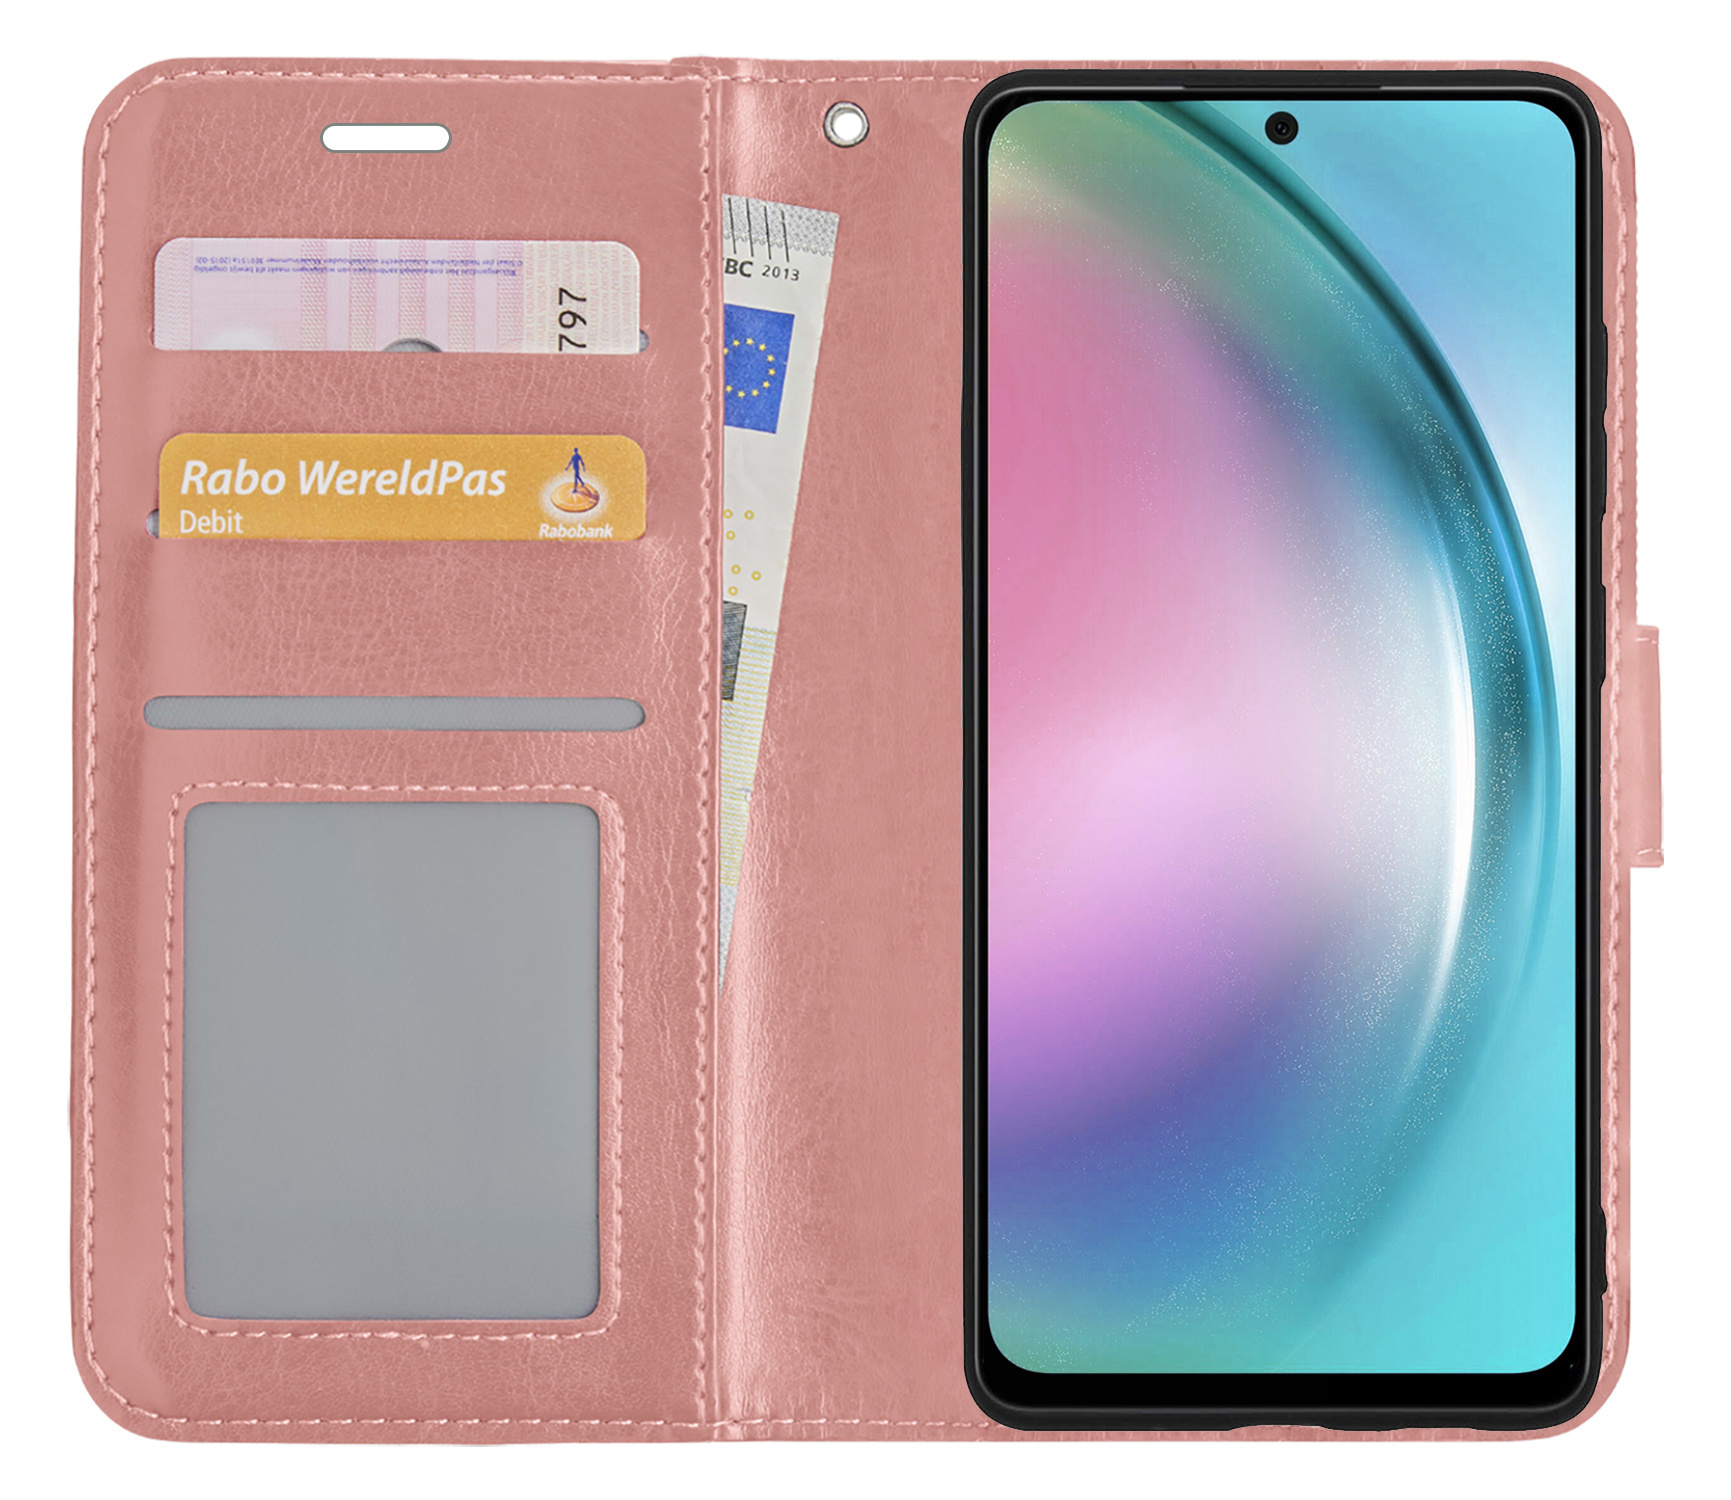 Samsung Galaxy A54 Hoesje Bookcase Hoes Flip Case Book Cover Met Screenprotector - Samsung A54 Hoes Book Case Hoesje - Rose Goud